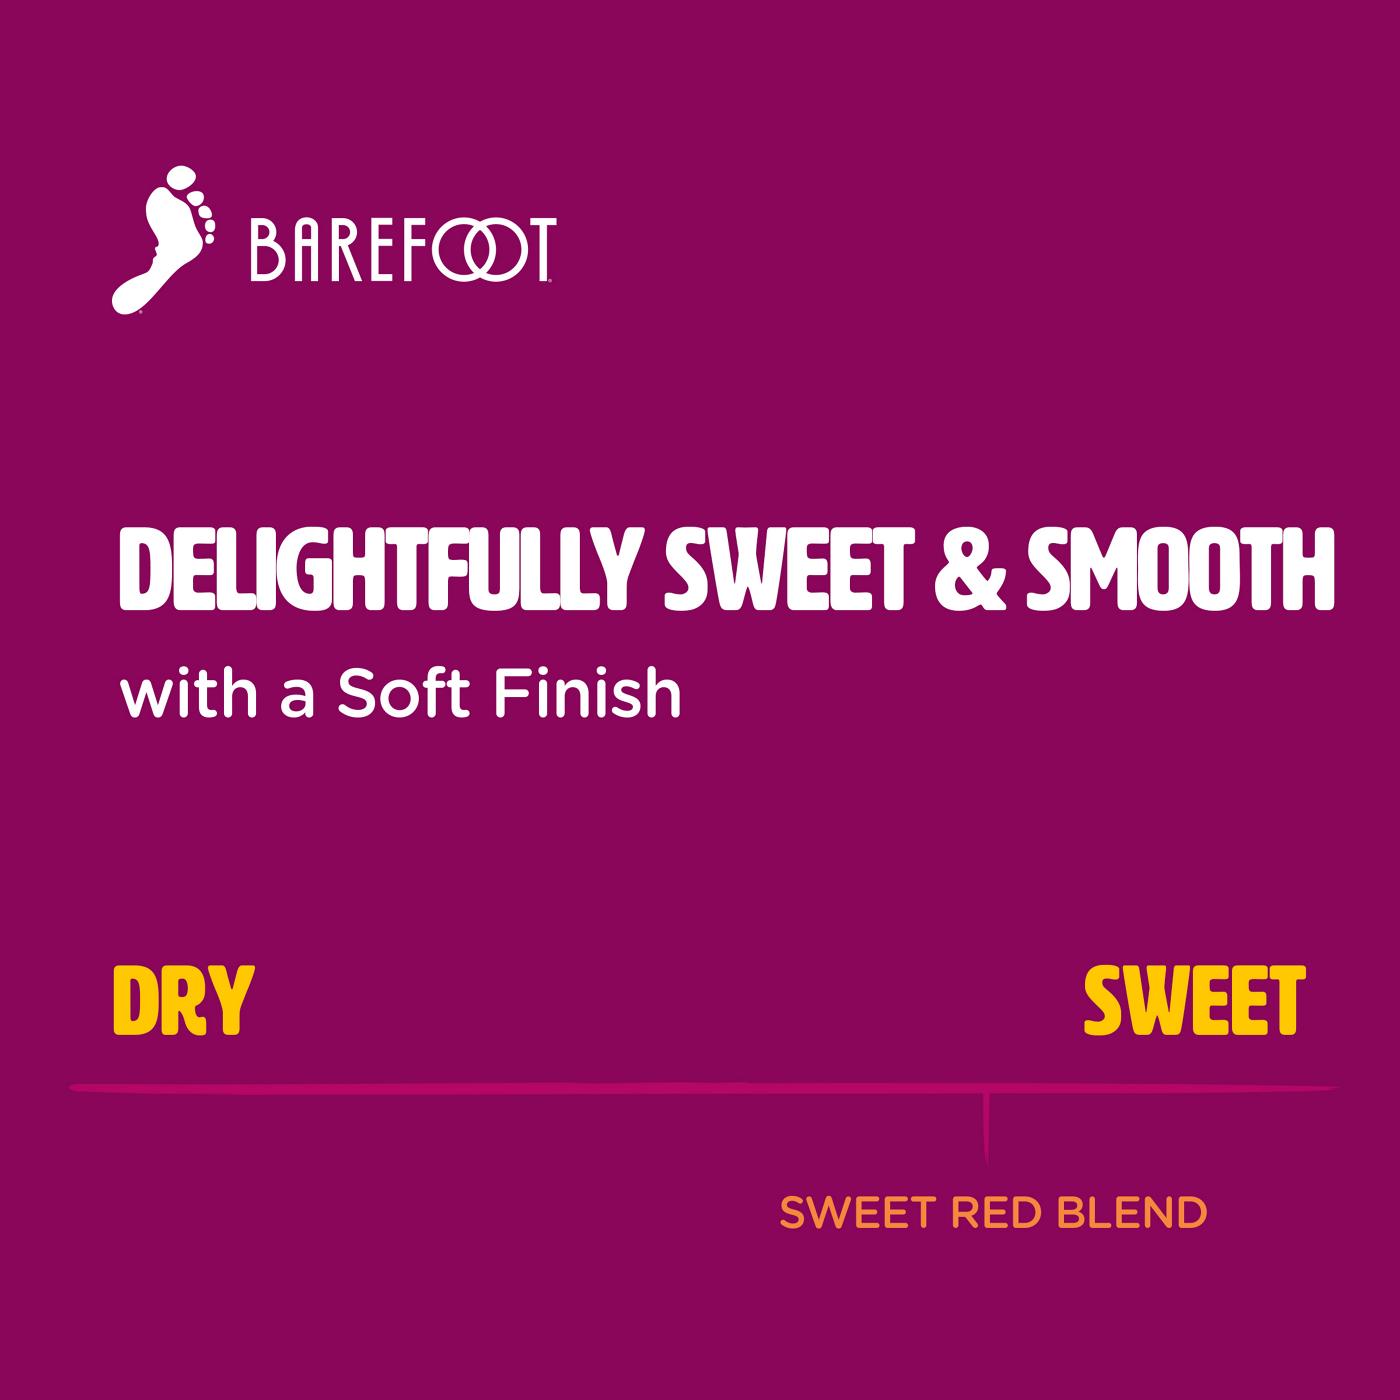 Barefoot Sweet Red Wine 187 mL; image 4 of 5